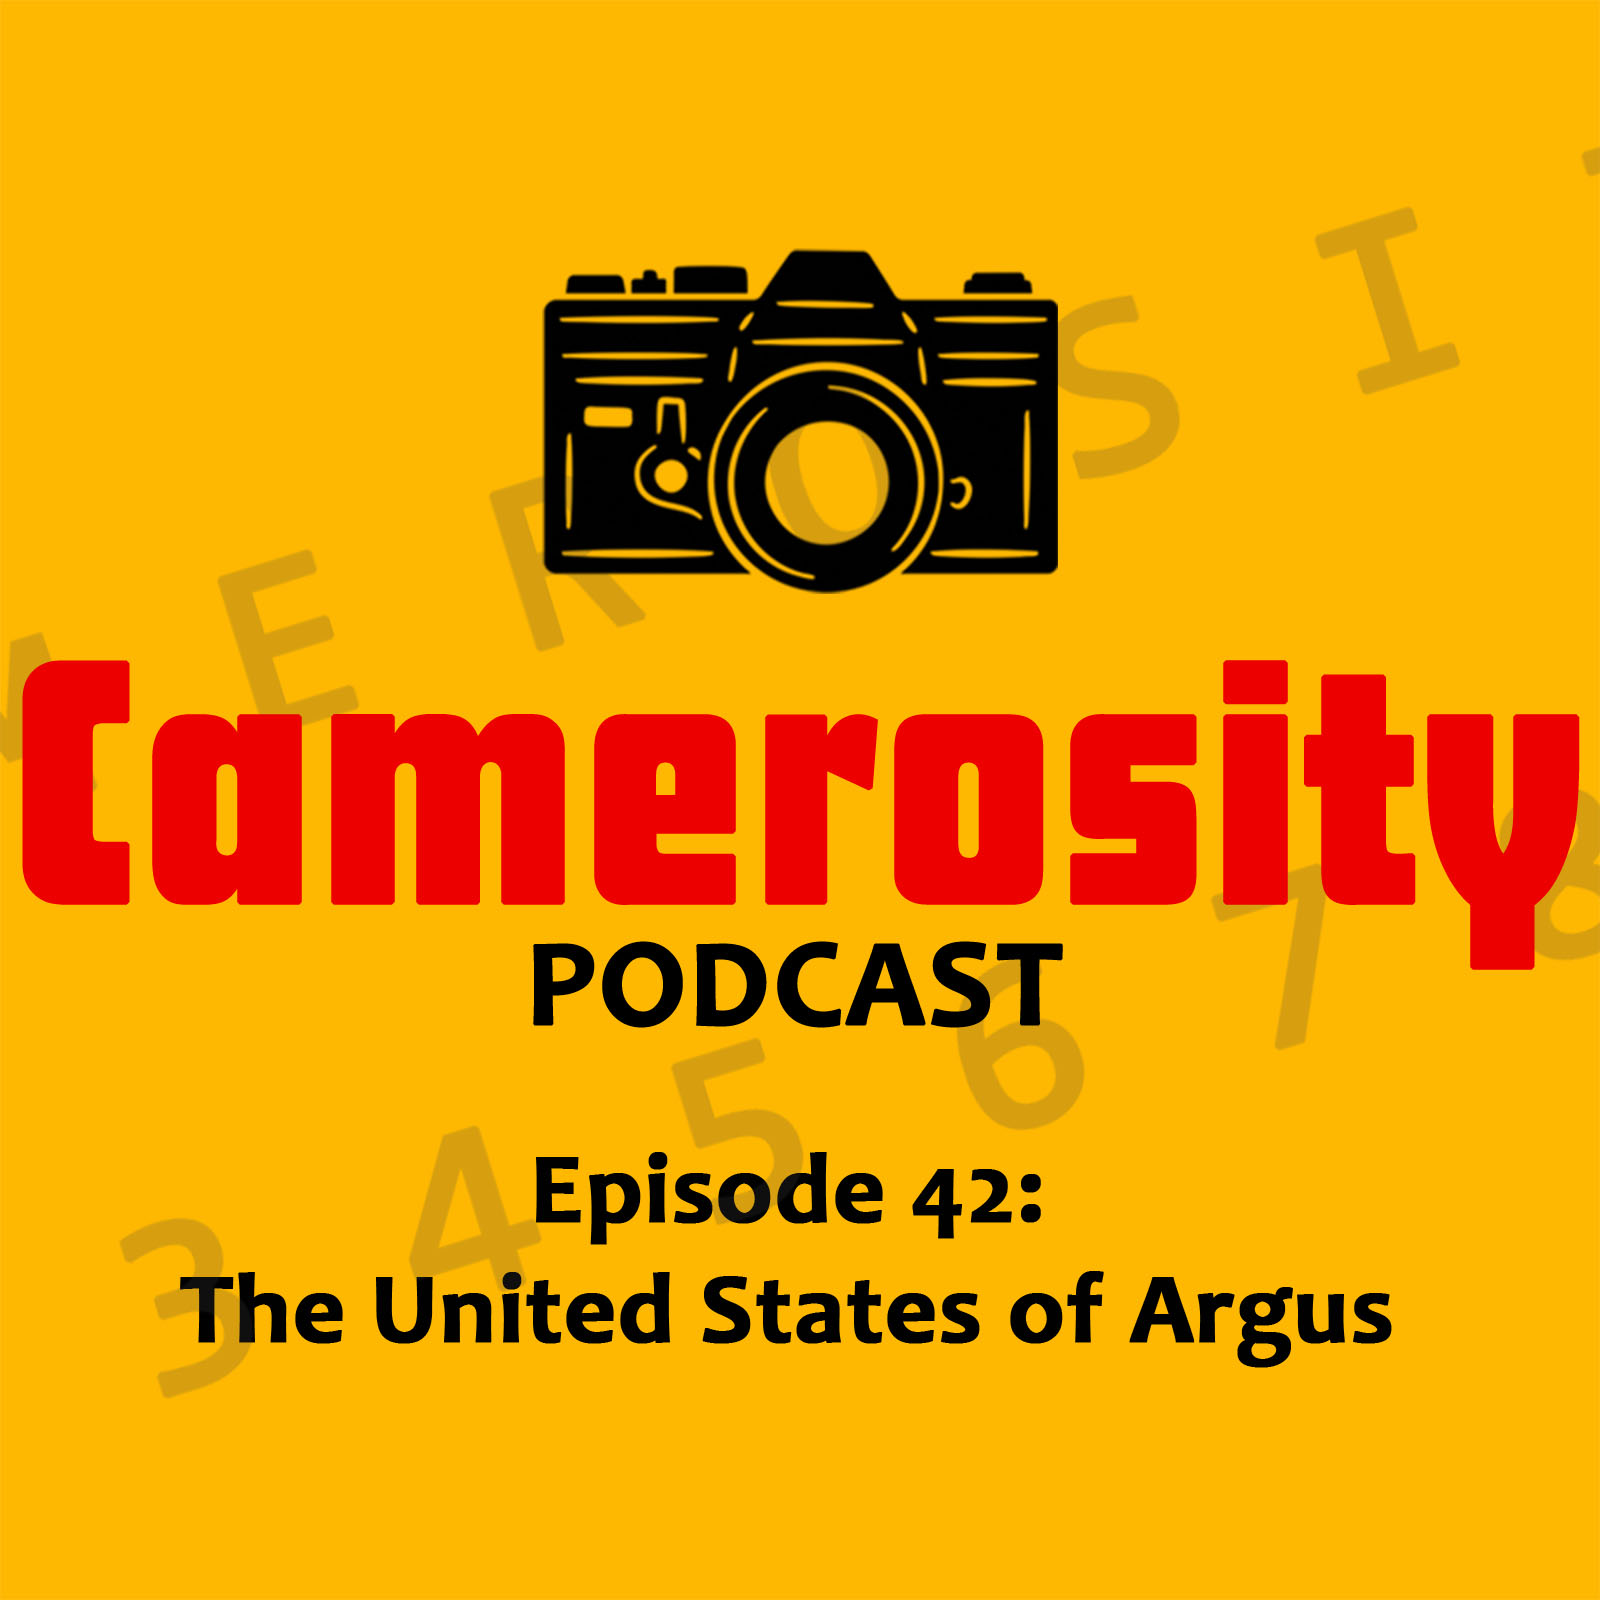 Episode 42: The United States of Argus